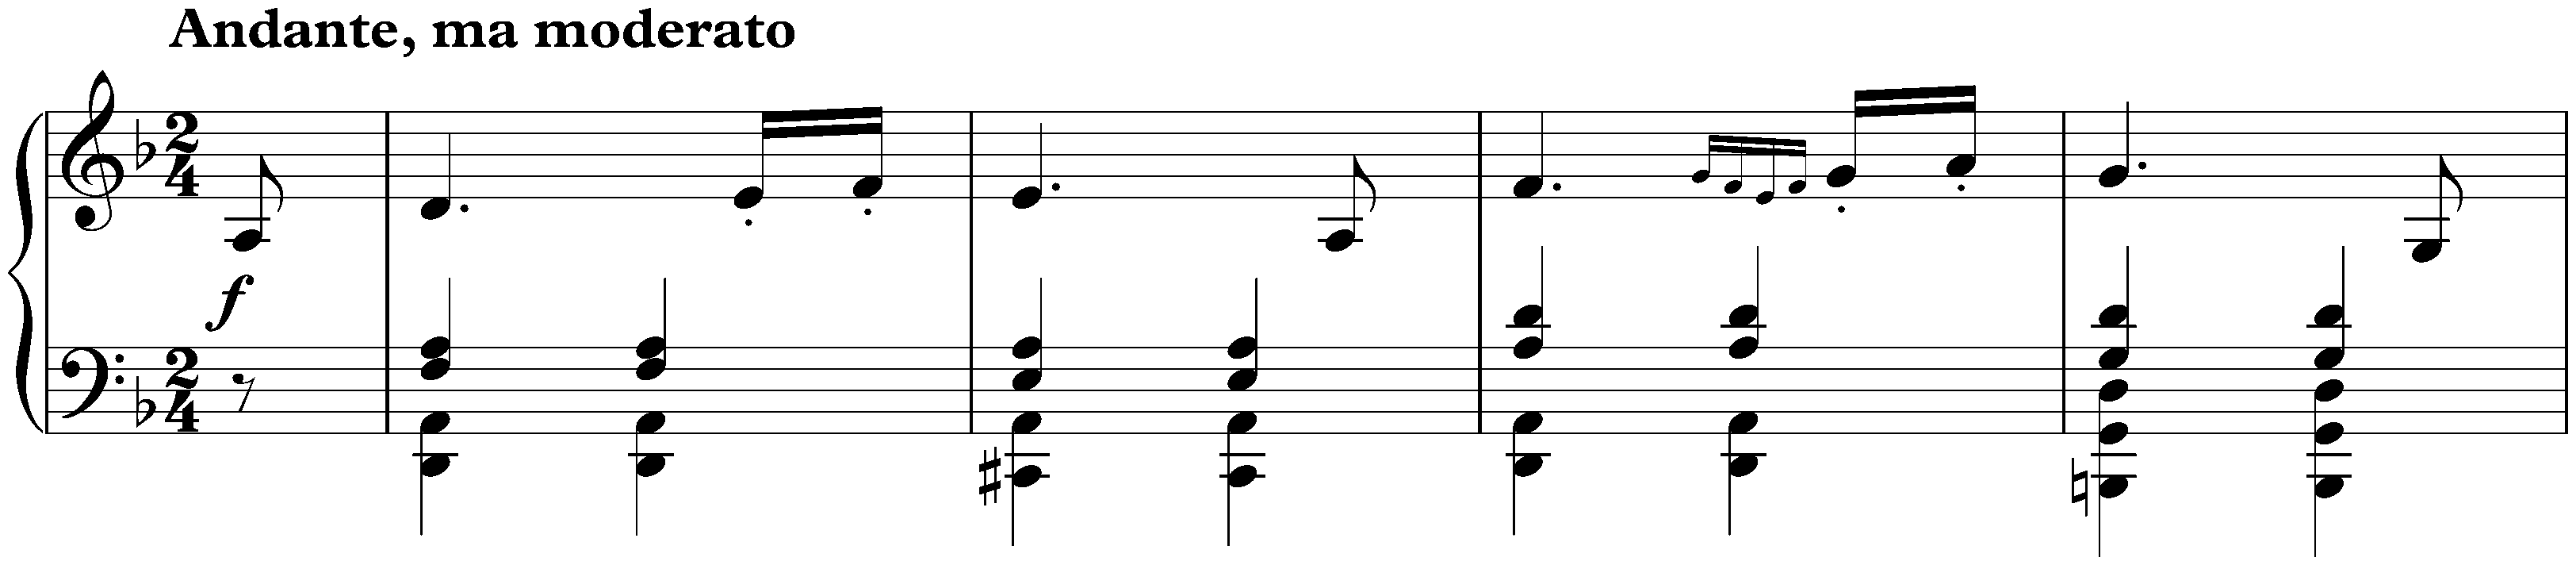 Theme and Variations in D minor, op. 18